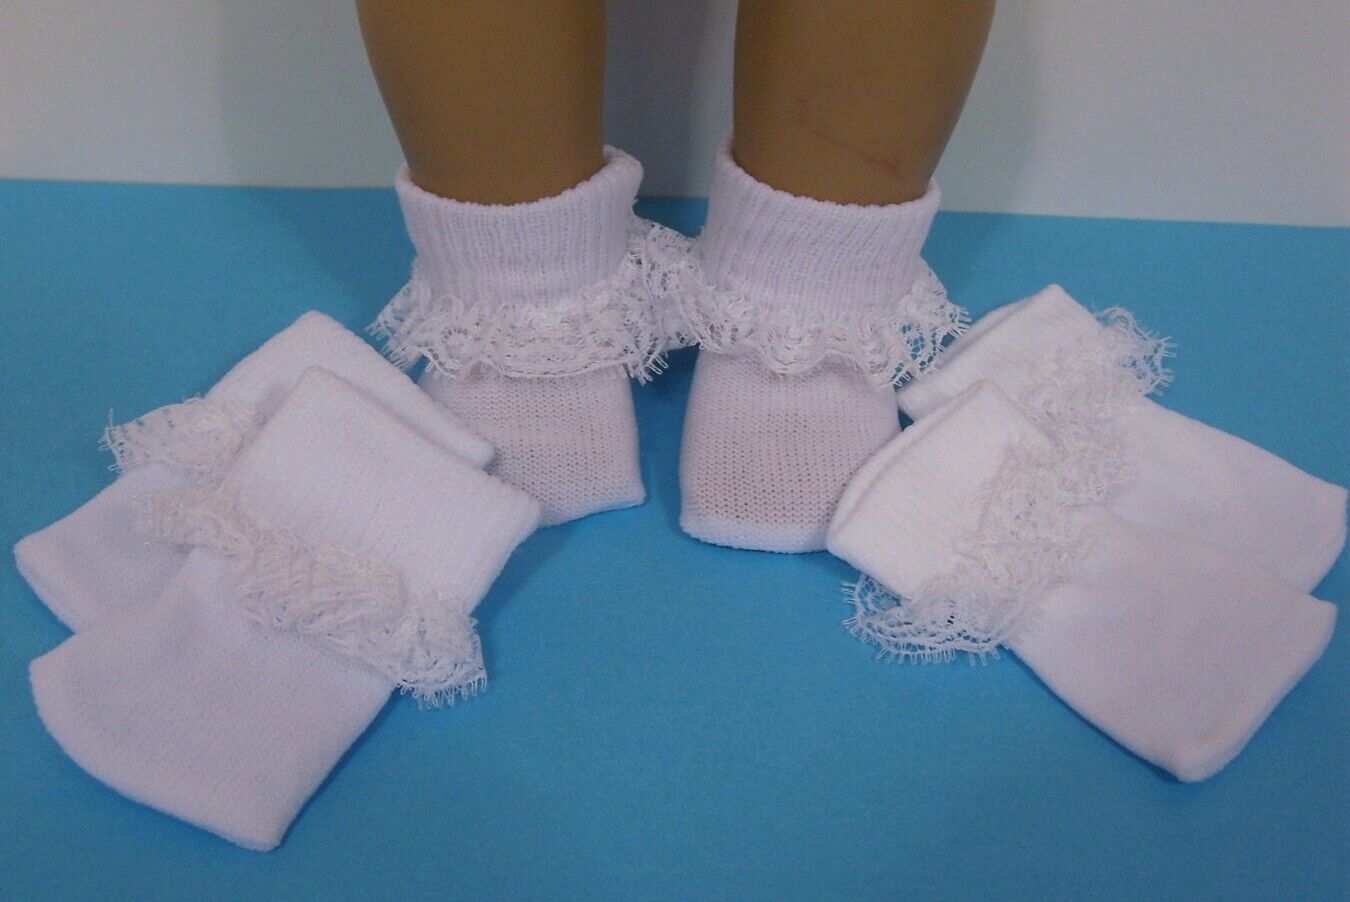 2 PAIRS White Socks w Lace for American Girl 18/" Bitty 15/"  Doll Clothes Preemie